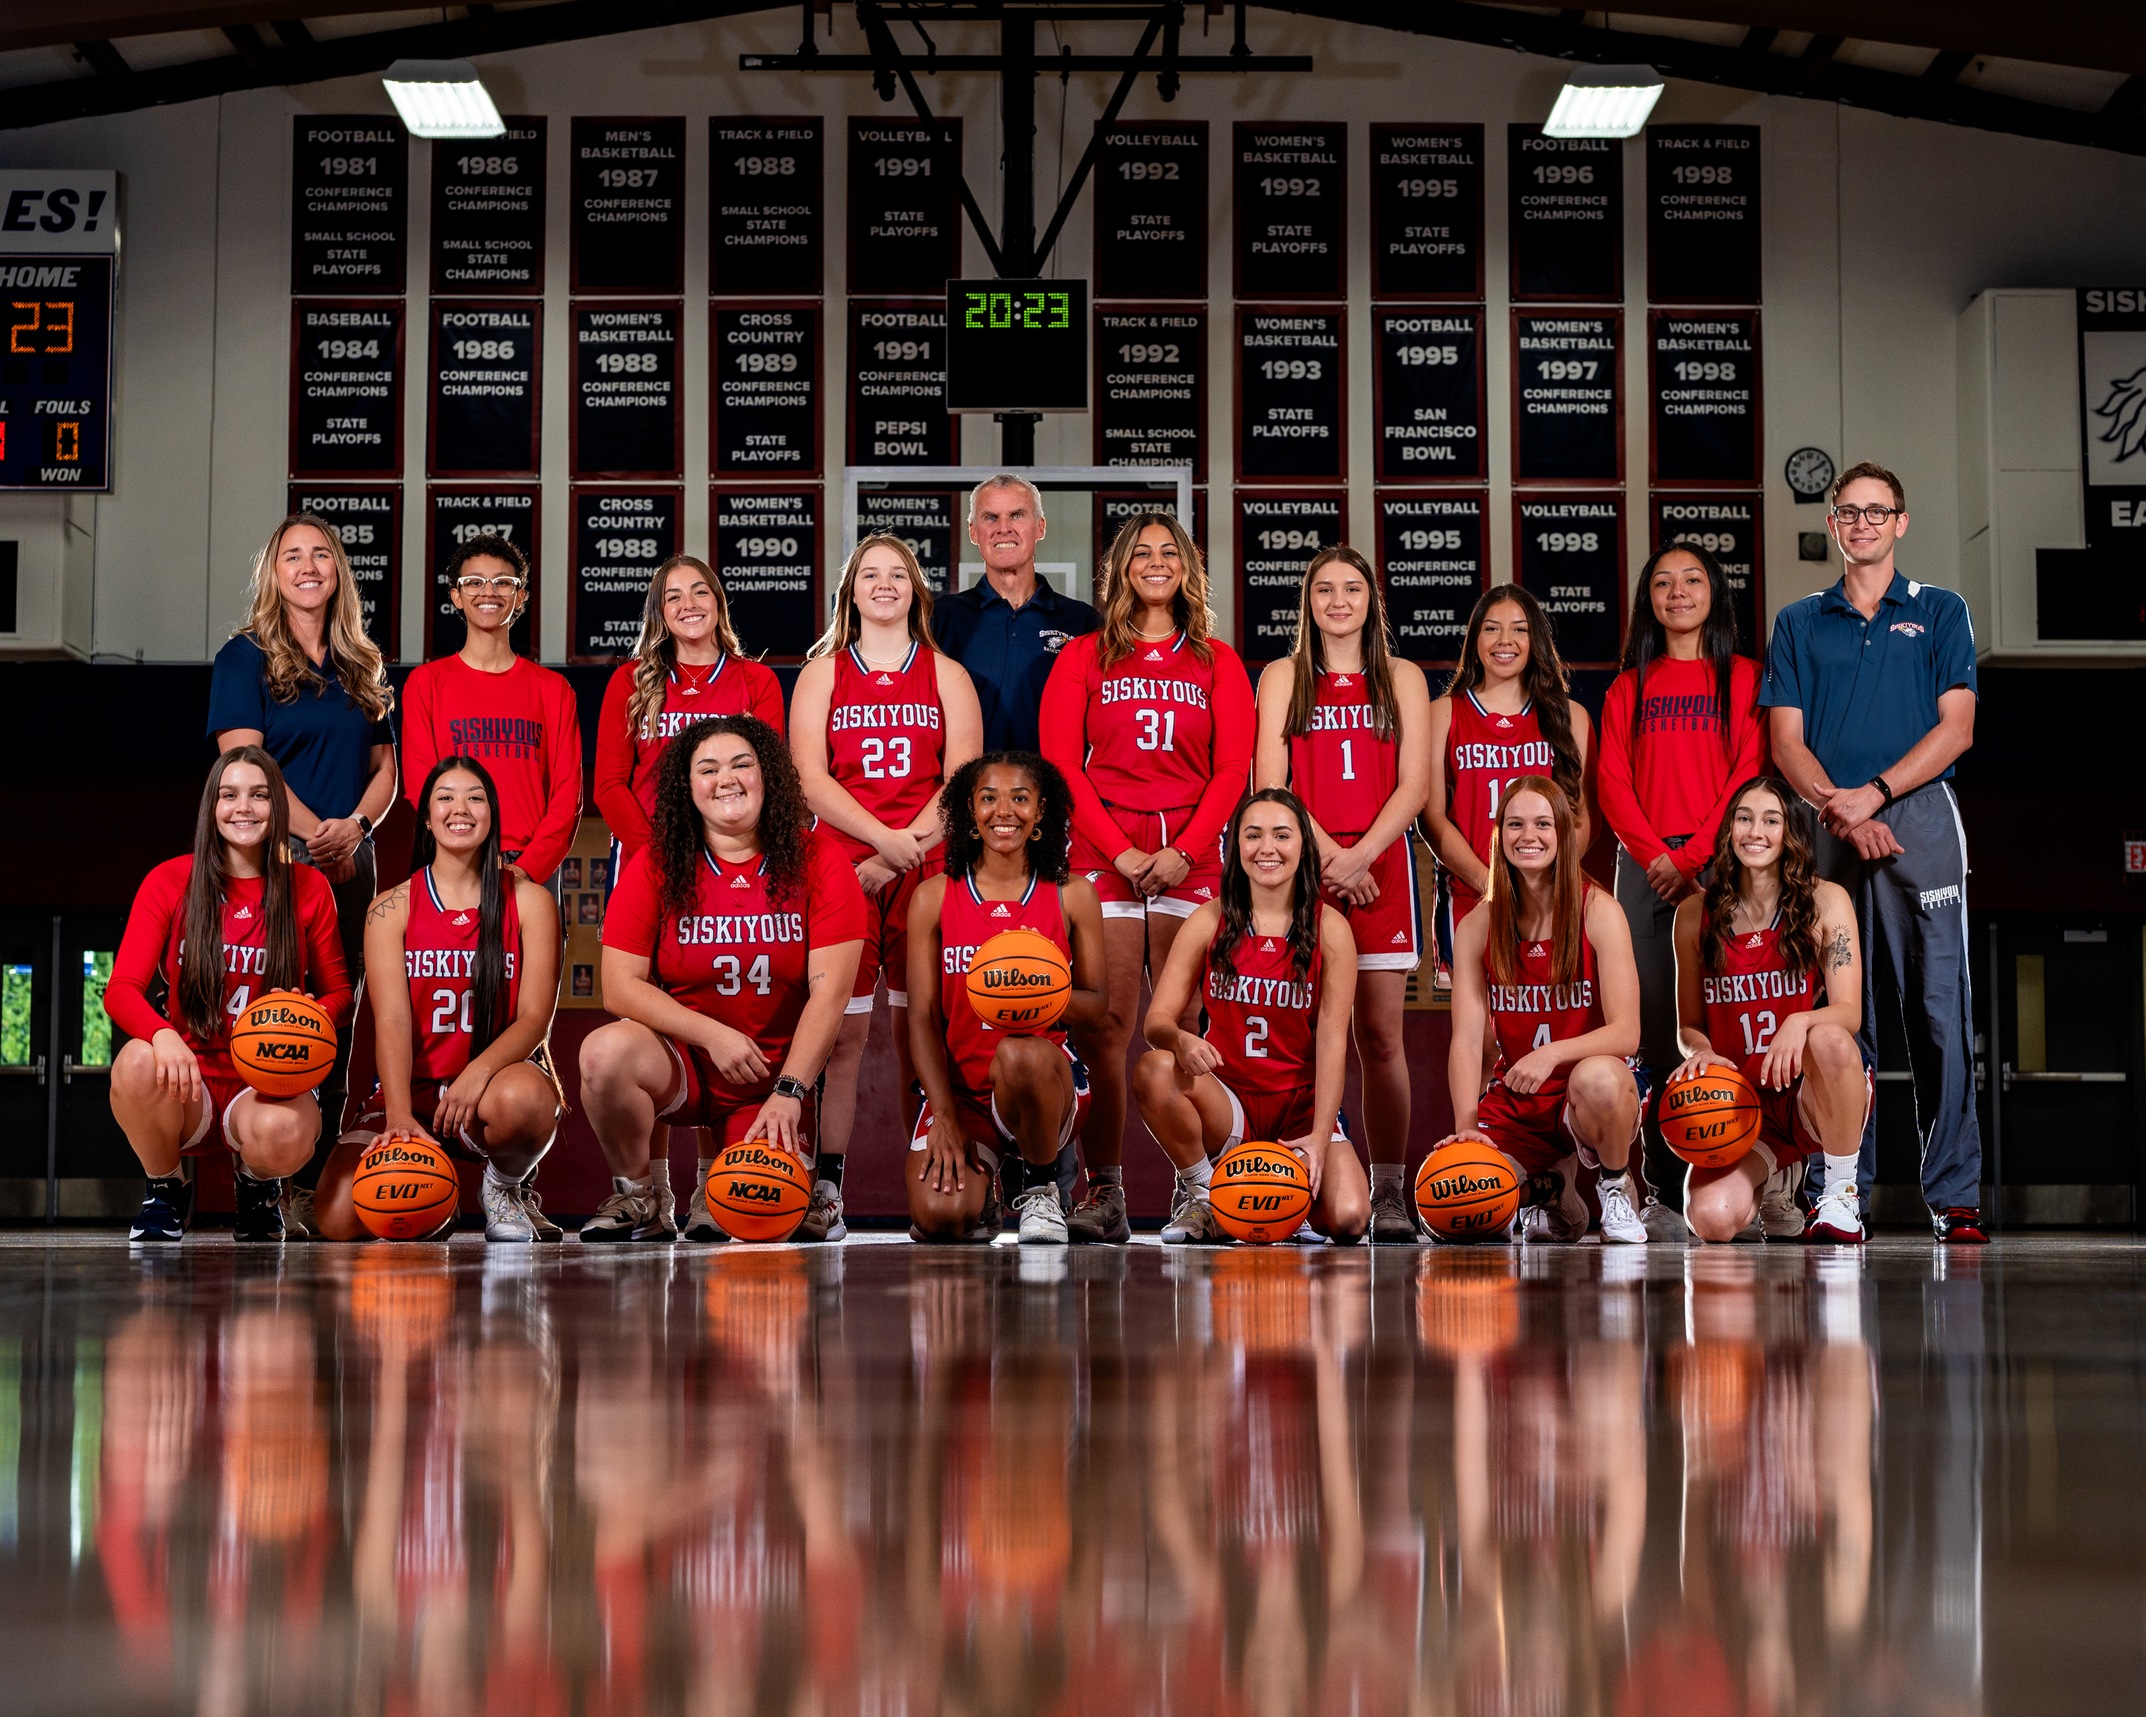 Women’s hoops team has a different look this winter